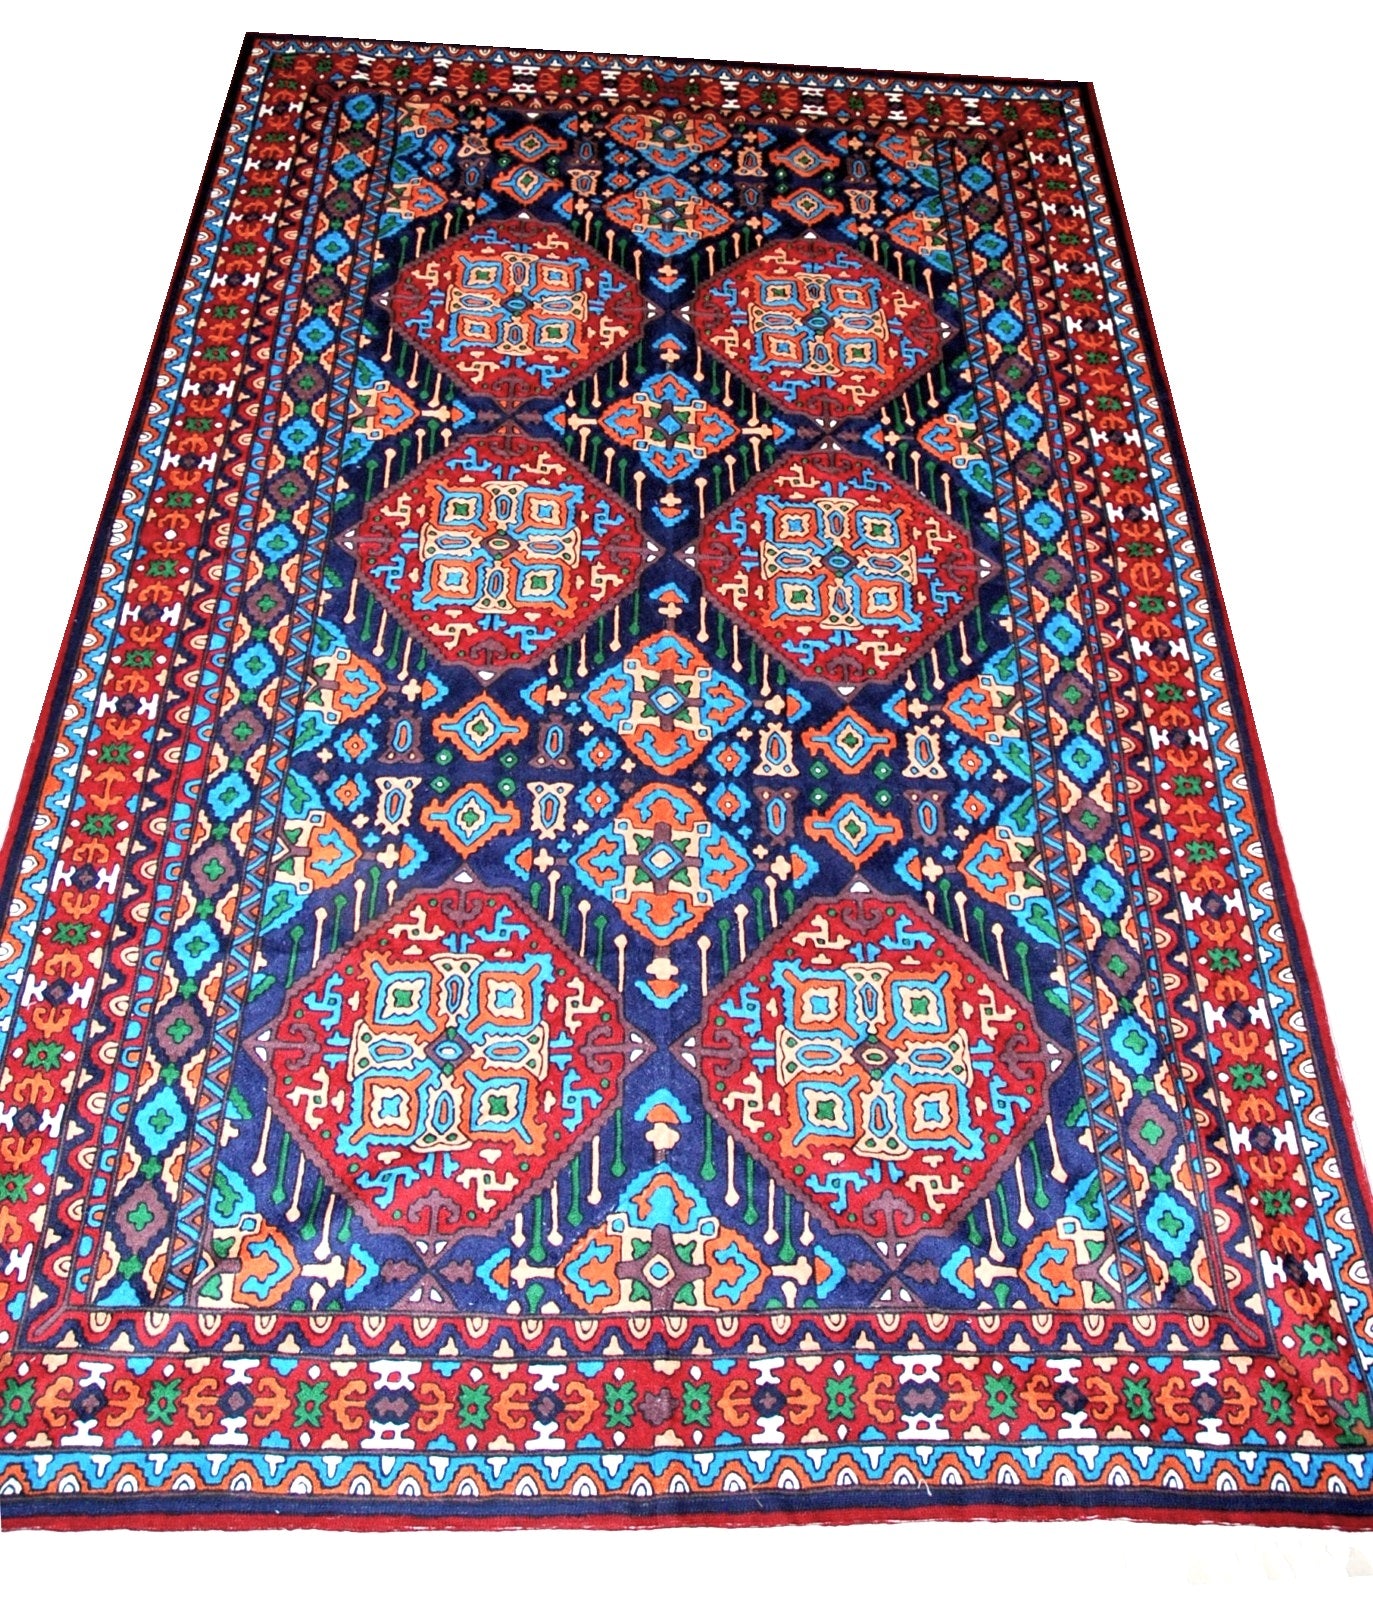 ChainStitch Tapestry Wall Hanging Area Rug Kelim, Multicolor Embroidery 6x9 feet #CWR54108